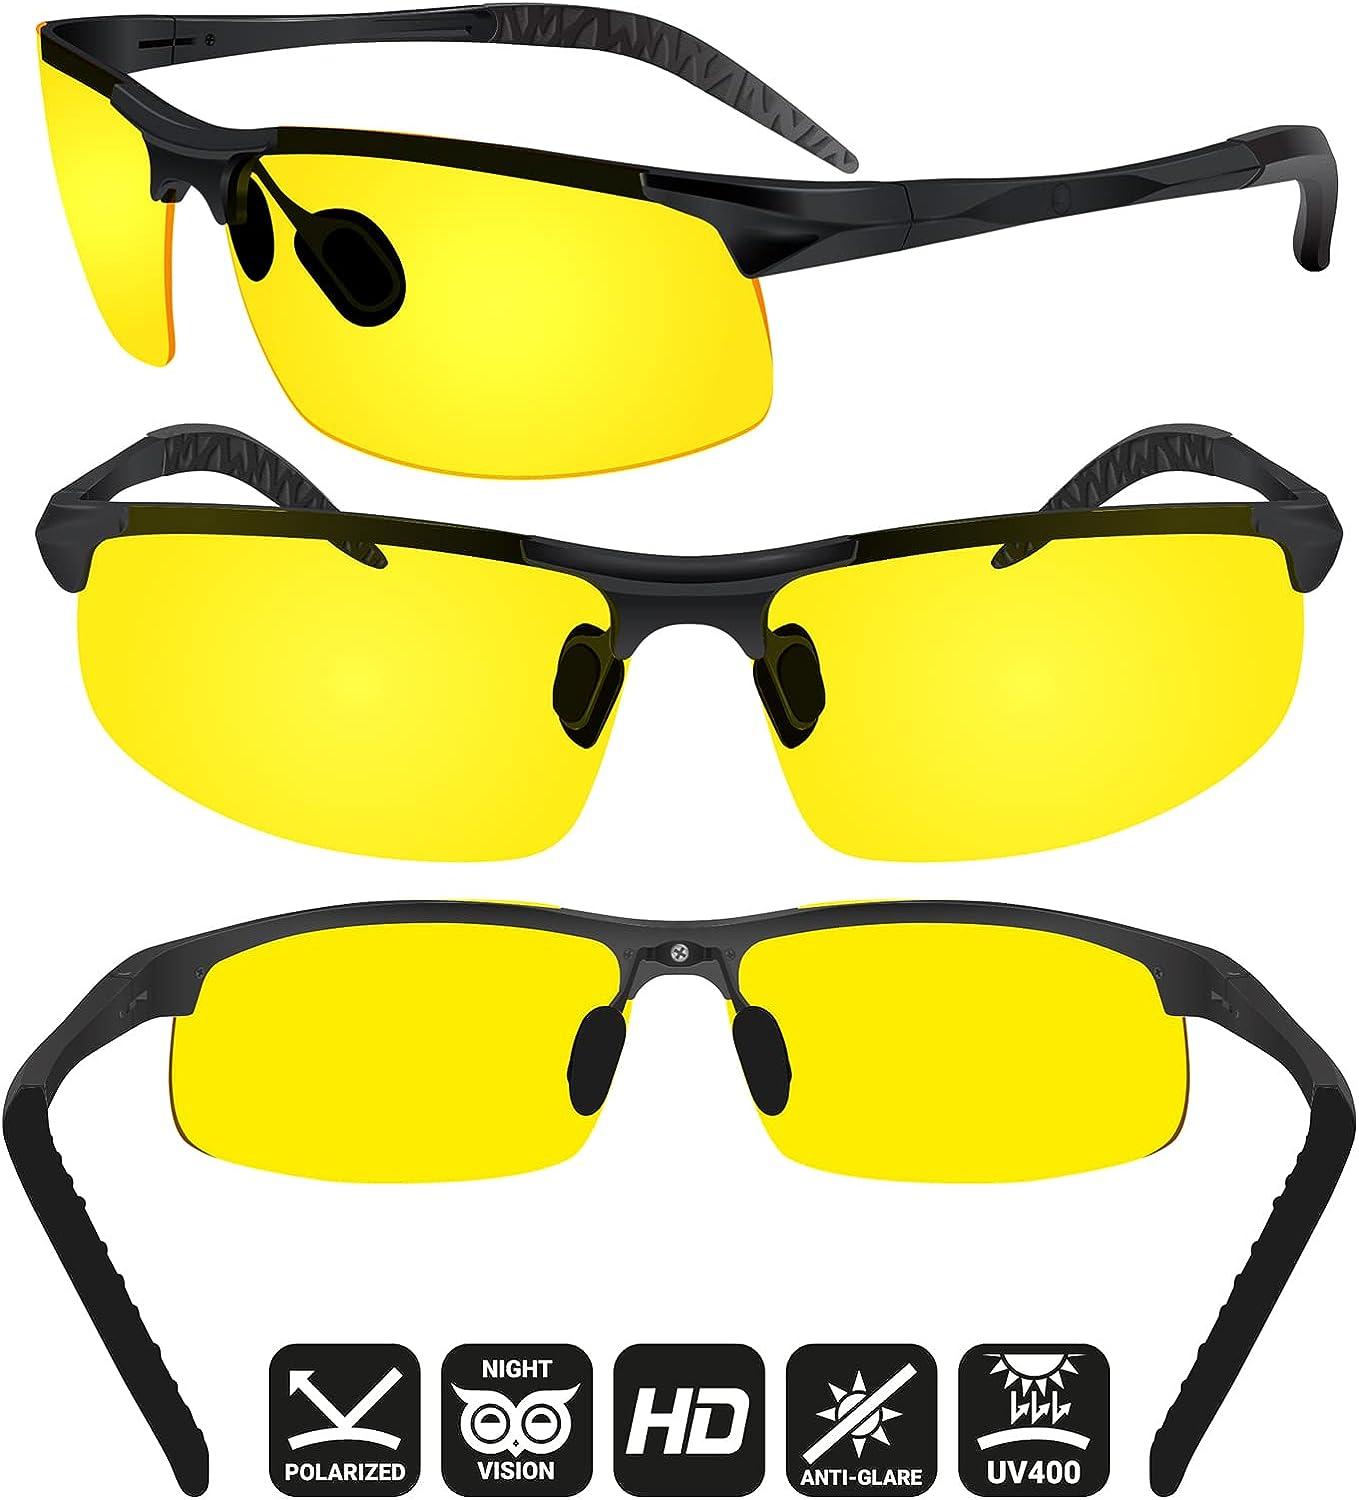 Night Driving Glasses Anti-Glare, High Definition Vision Clarity Lens  Polarized